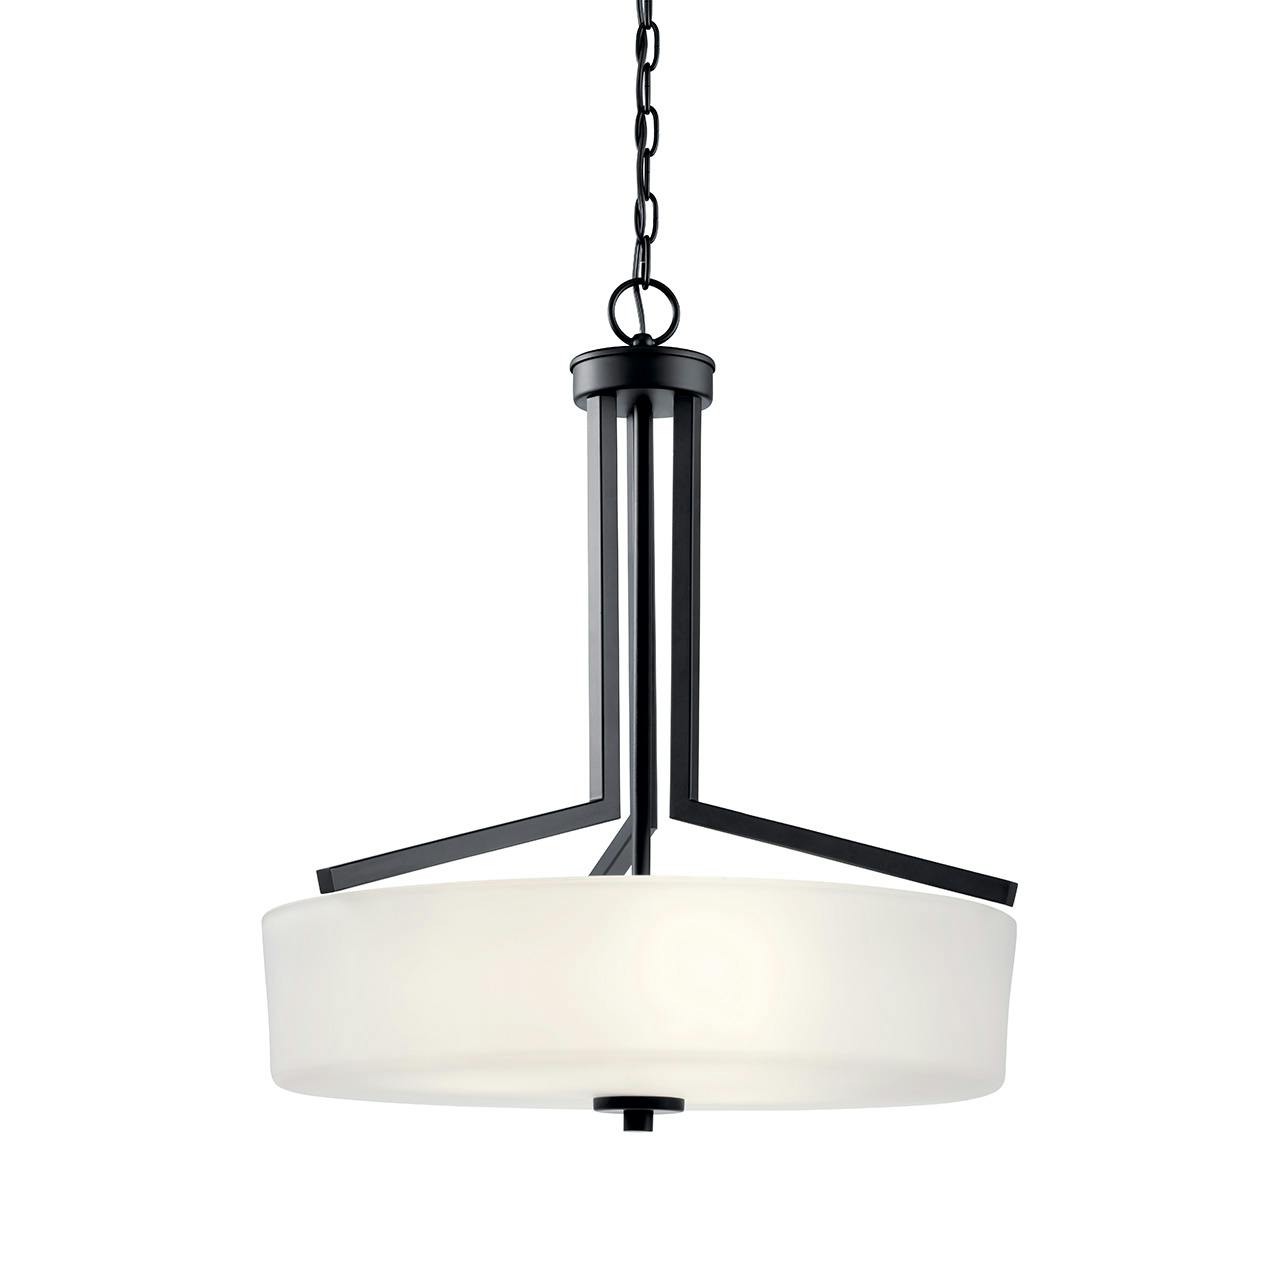 Skagos™ 3 Light Pendant in Black without the canopy on a white background